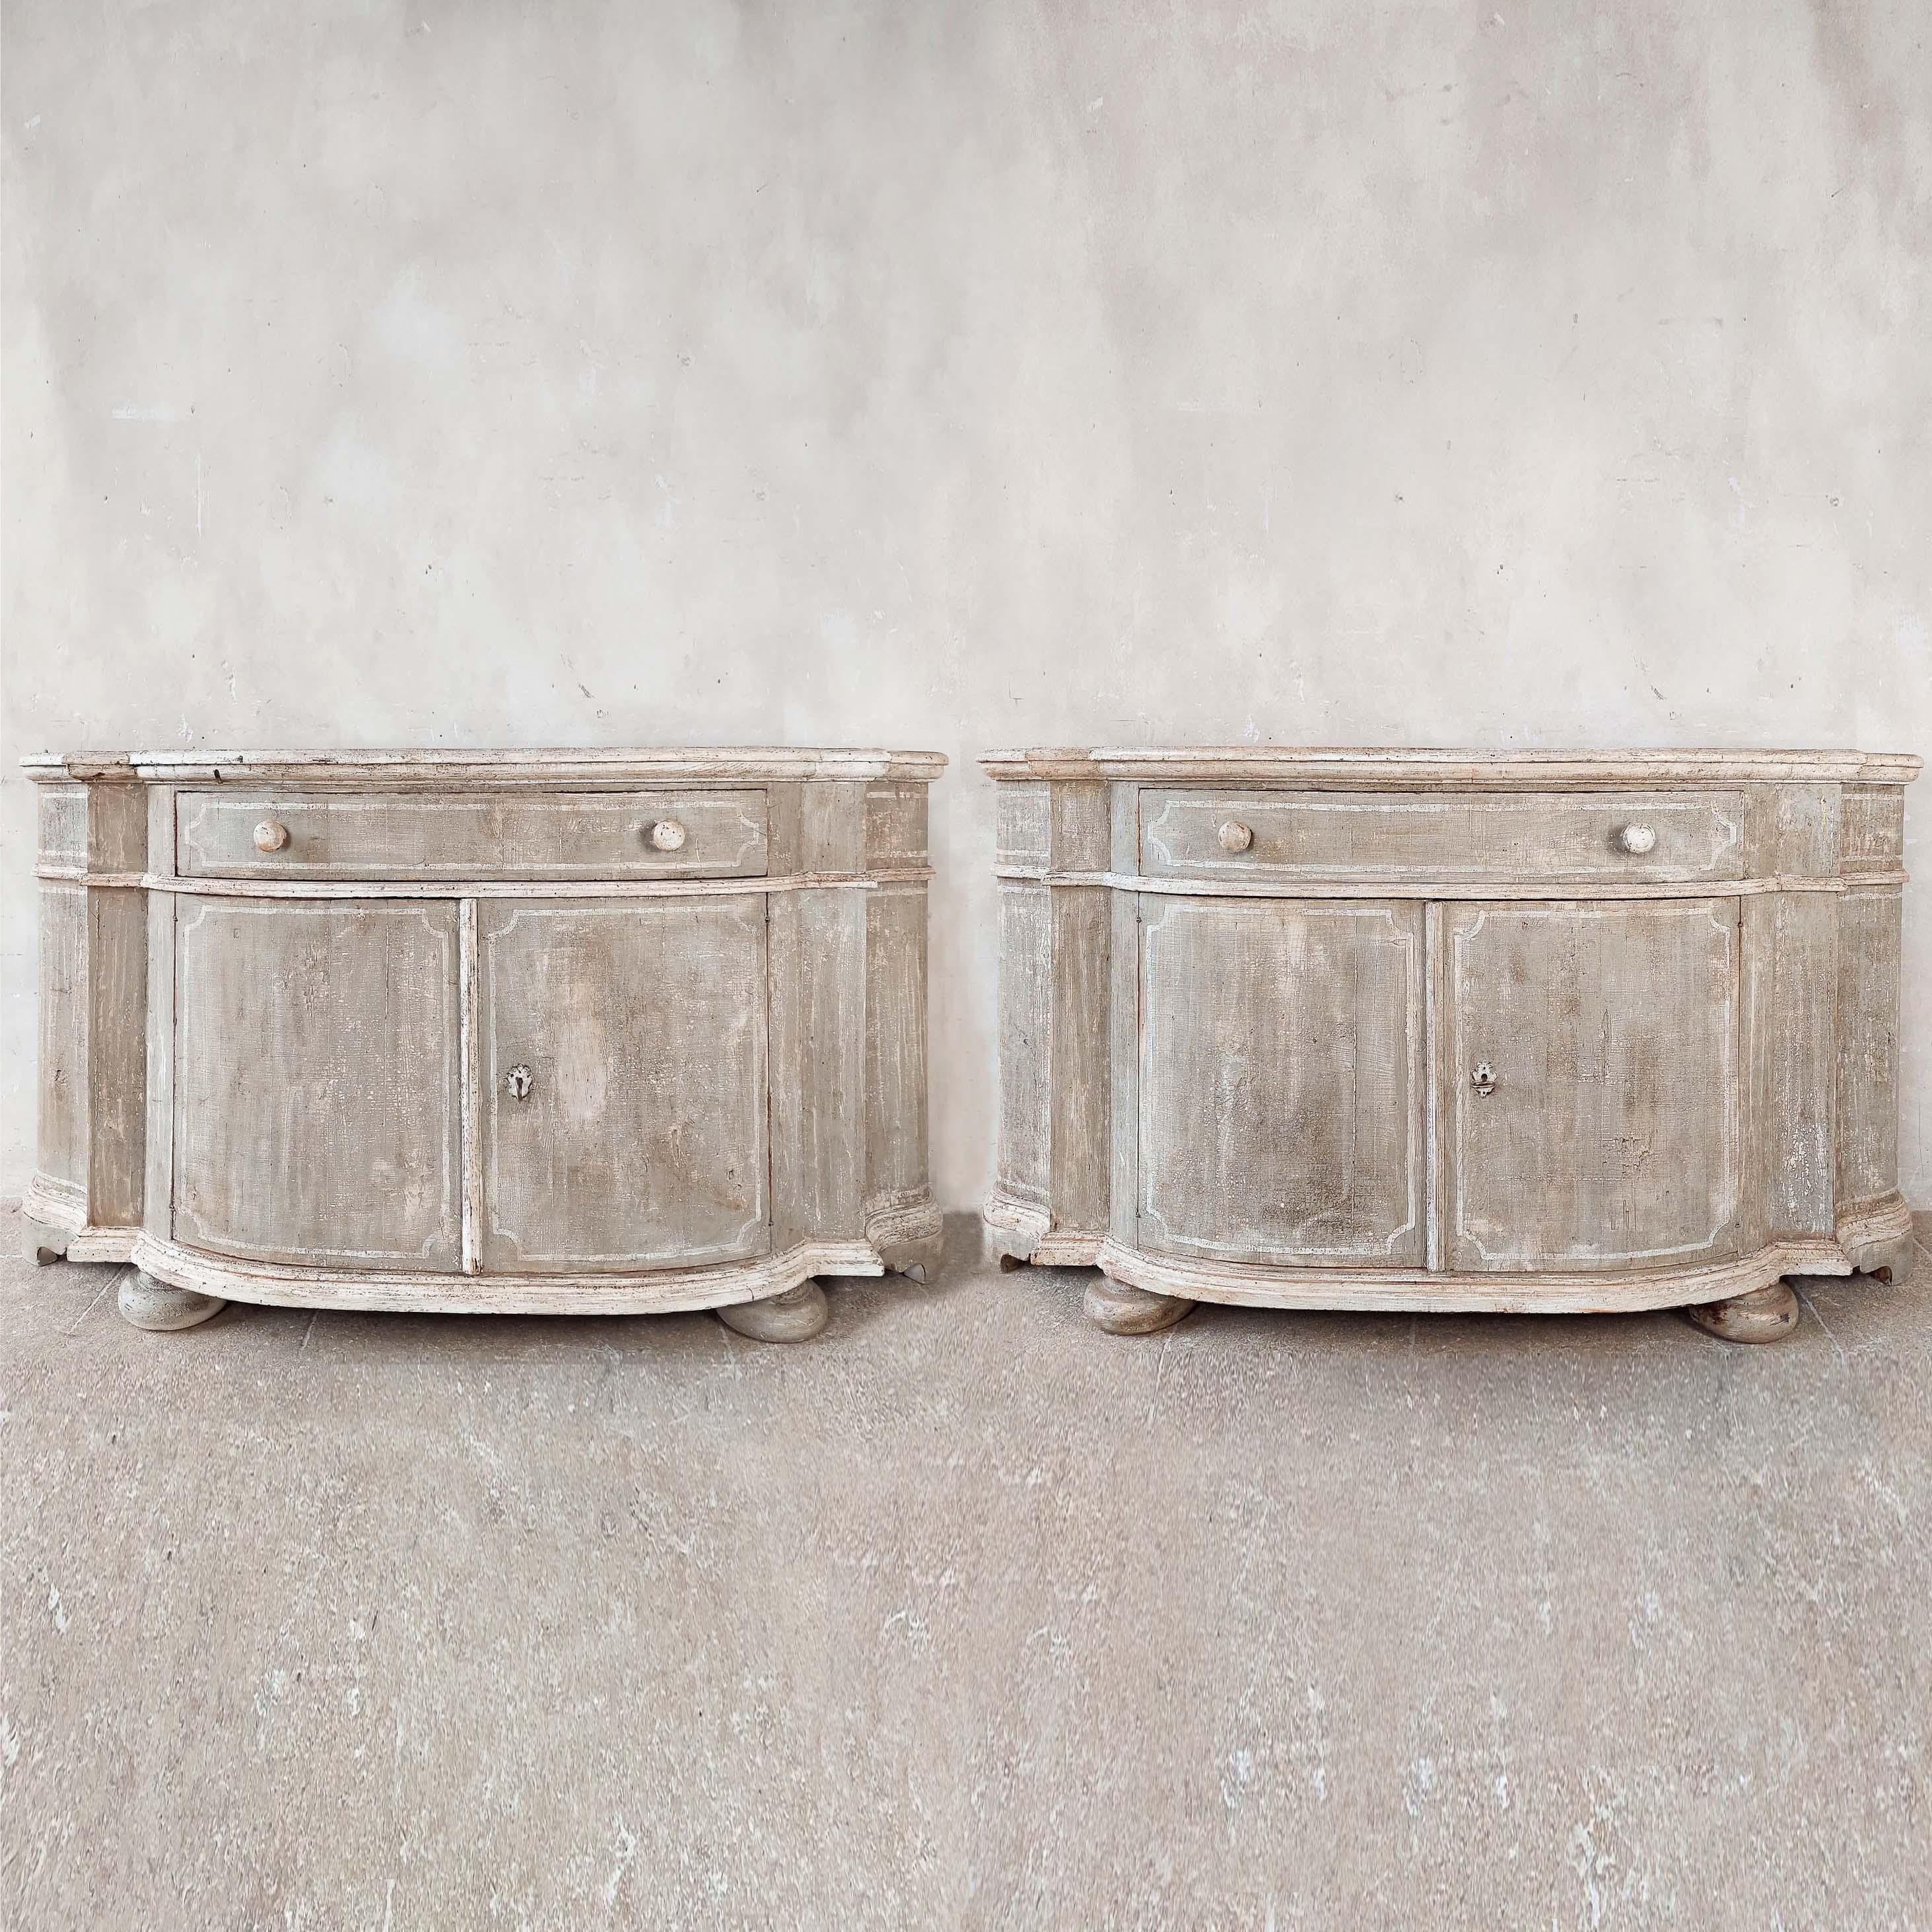 Pair of old wooden French cabinets or commodes, later decorated with a beautiful worn light warm gray and cream-colored patina.

dimensions: h 101 x w 185 x d 52 cm

price for the pair